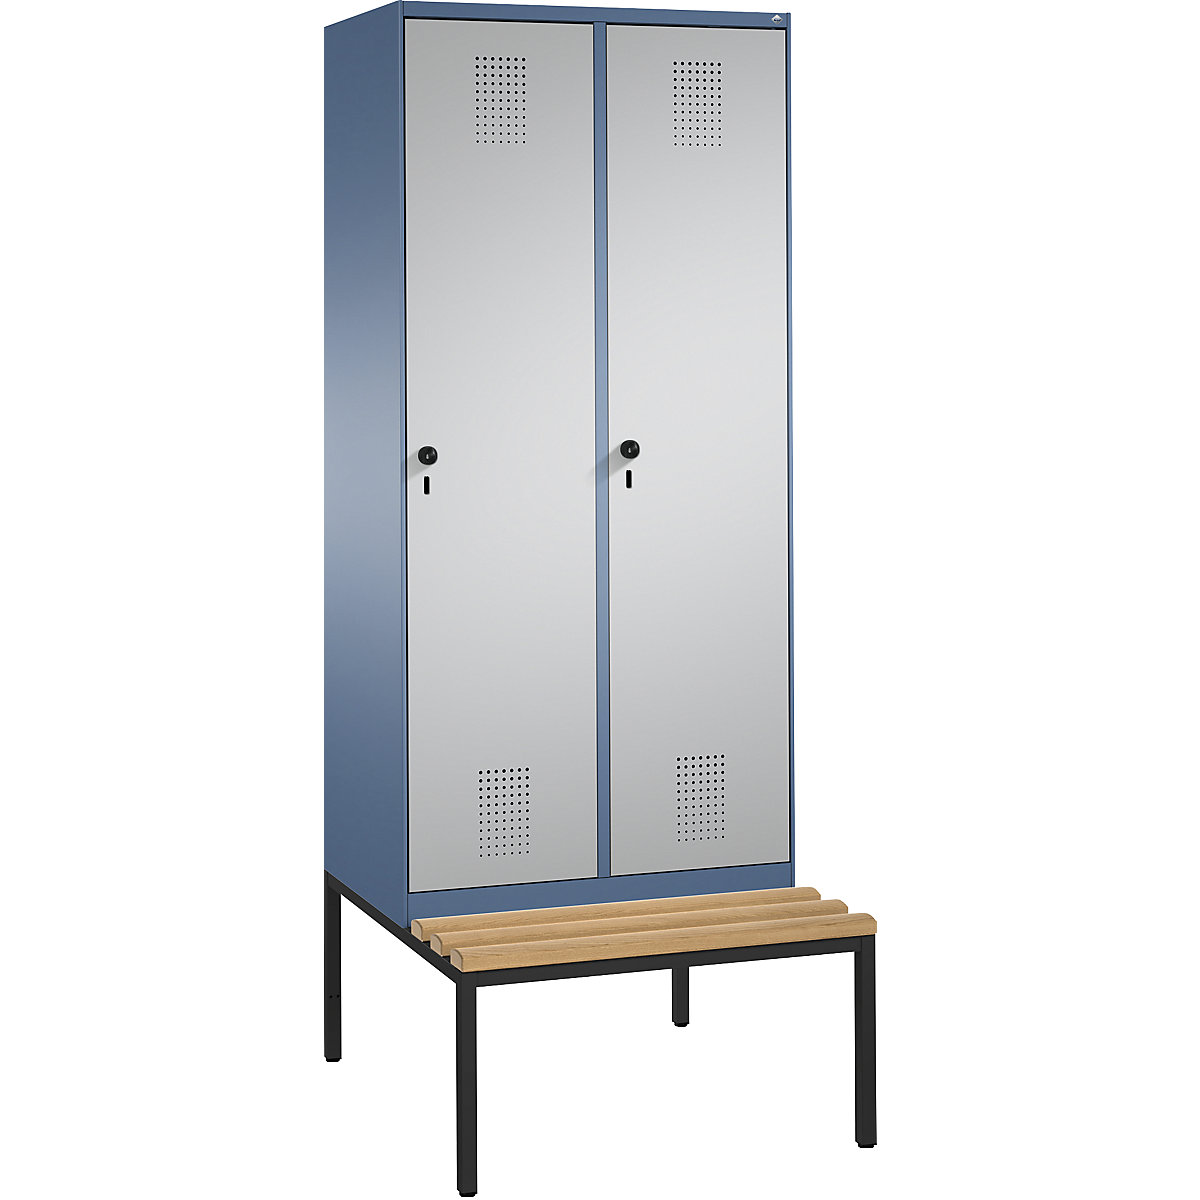 EVOLO cloakroom locker, with bench – C+P